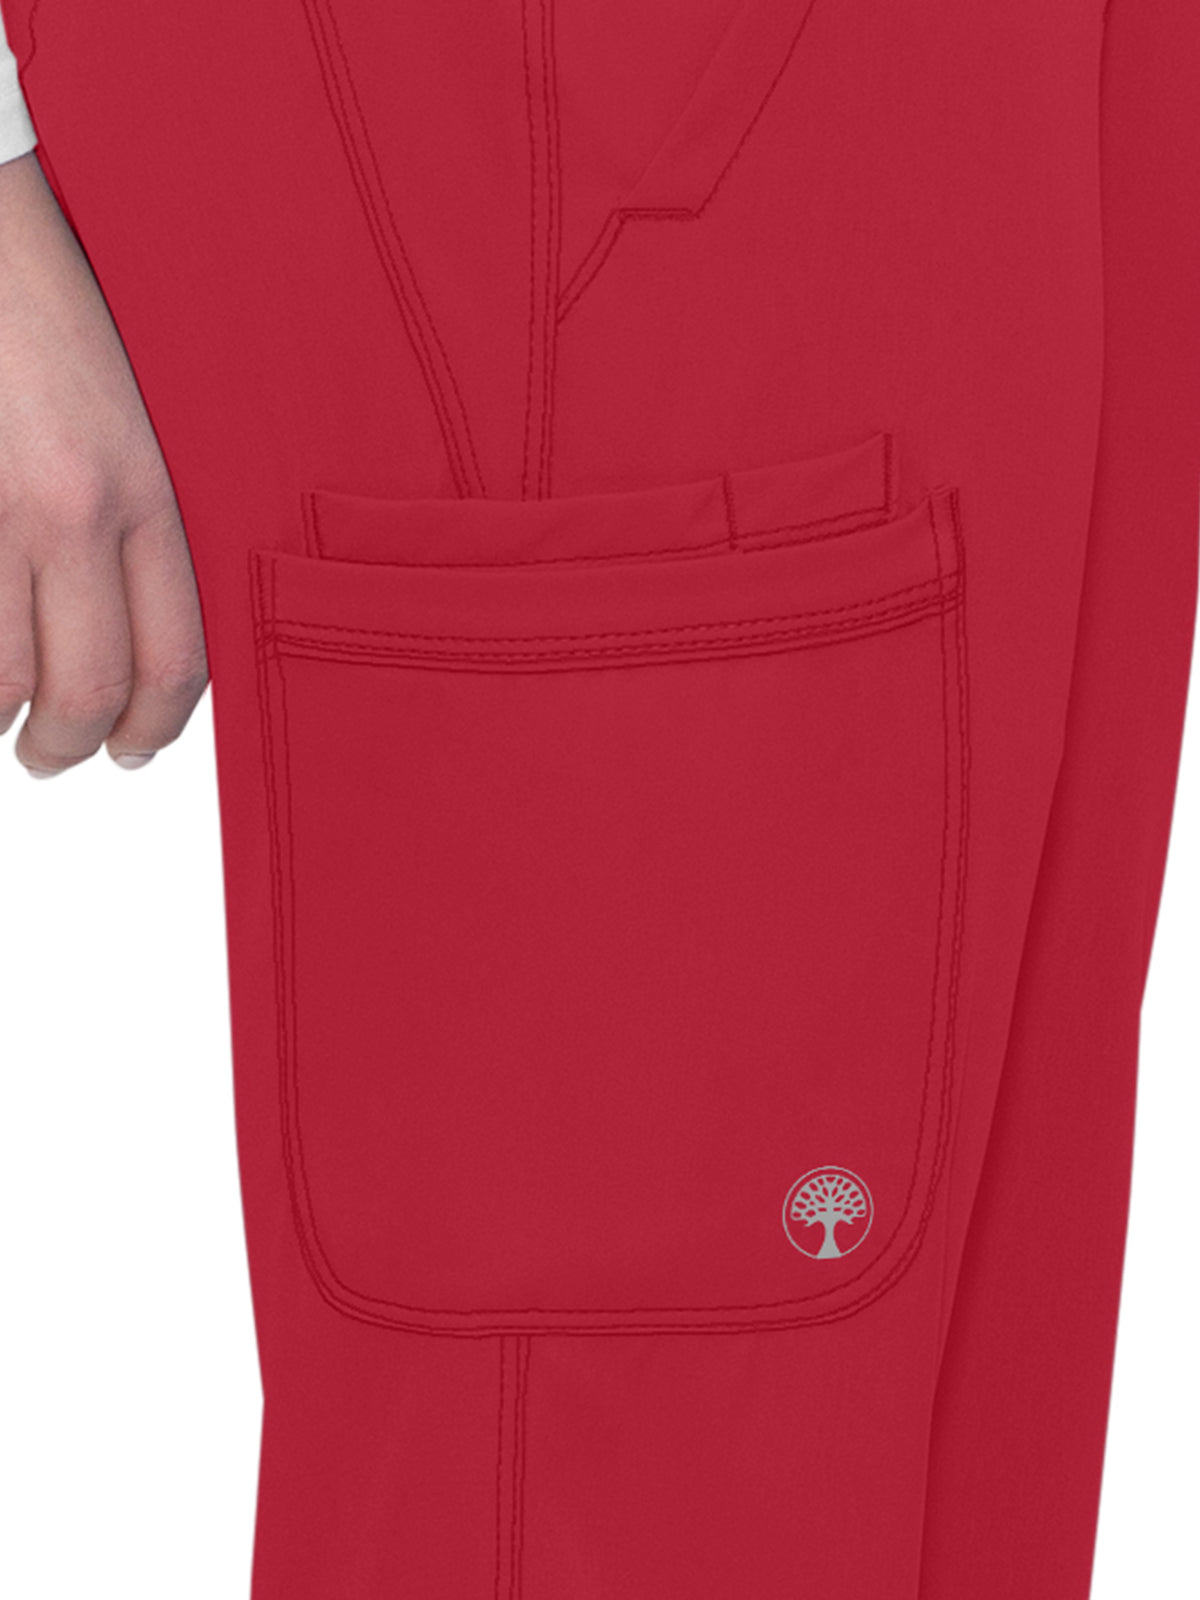 Women's Moisture Wicking Pant - 9500 - Red